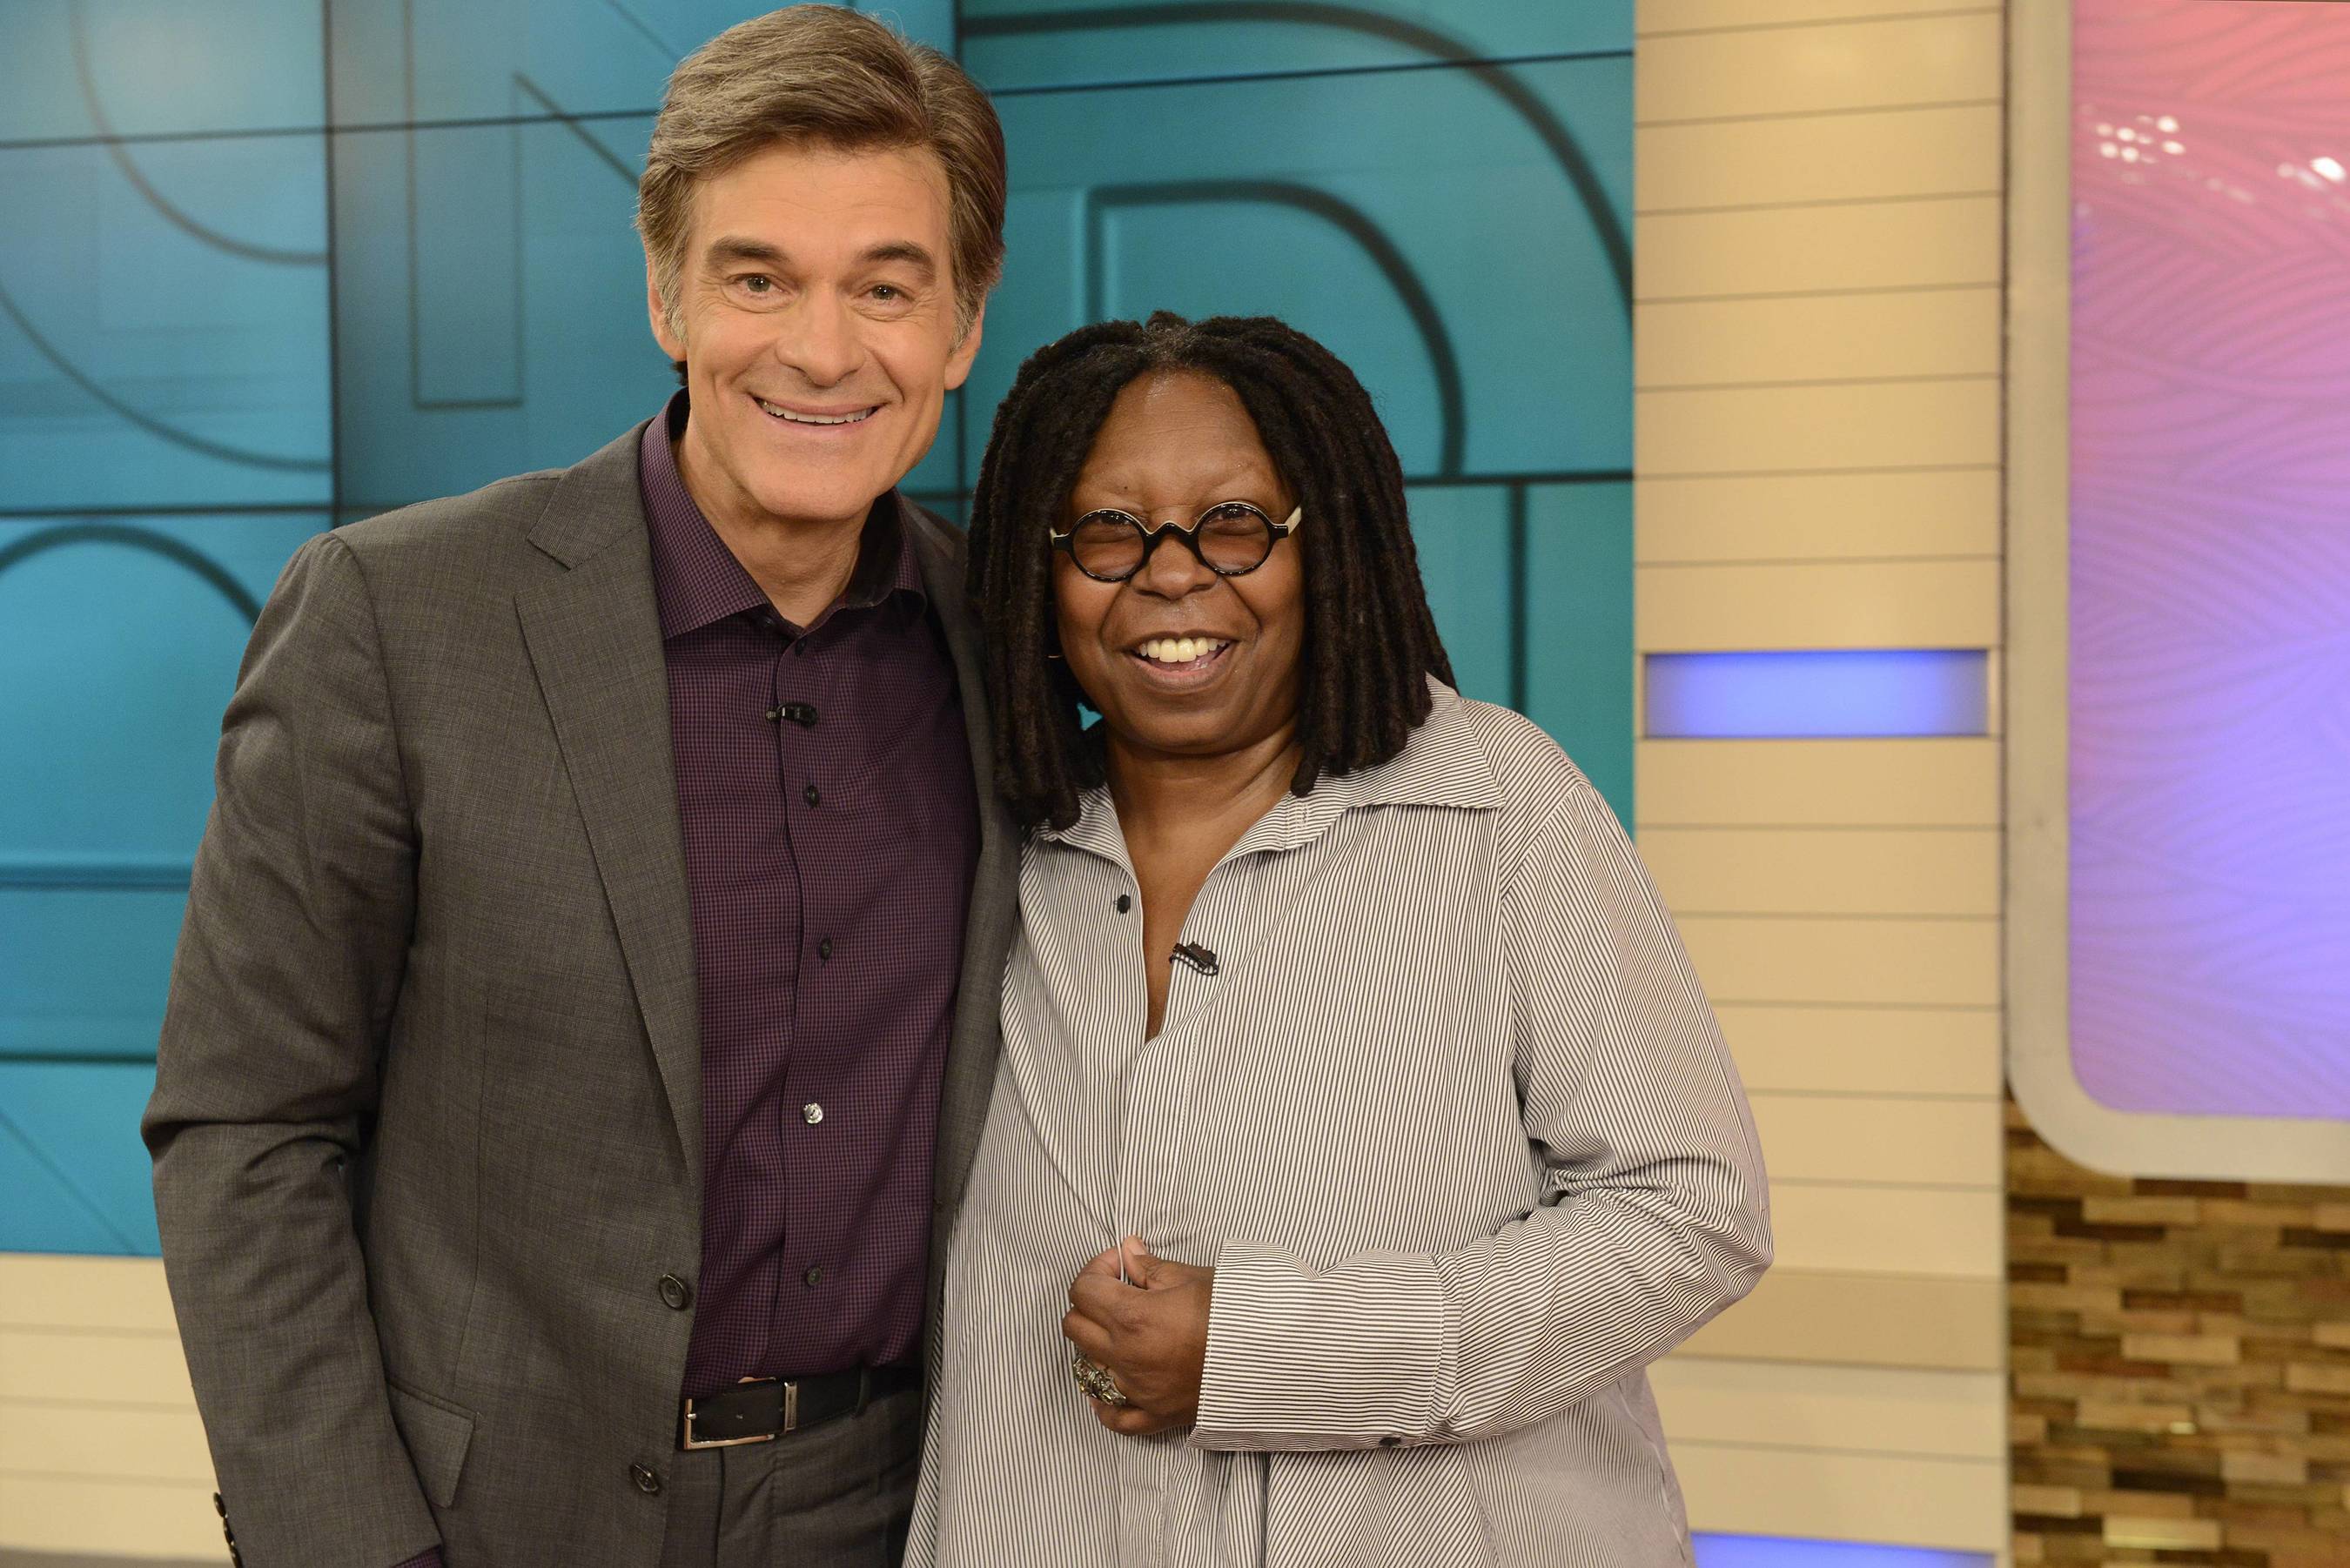 As part of May's programming, Dr. Oz welcomes Whoopi Goldberg to reveal how she quit her long-time addiction to smoking on 5/15. (PRNewsFoto/The Dr. Oz Show)